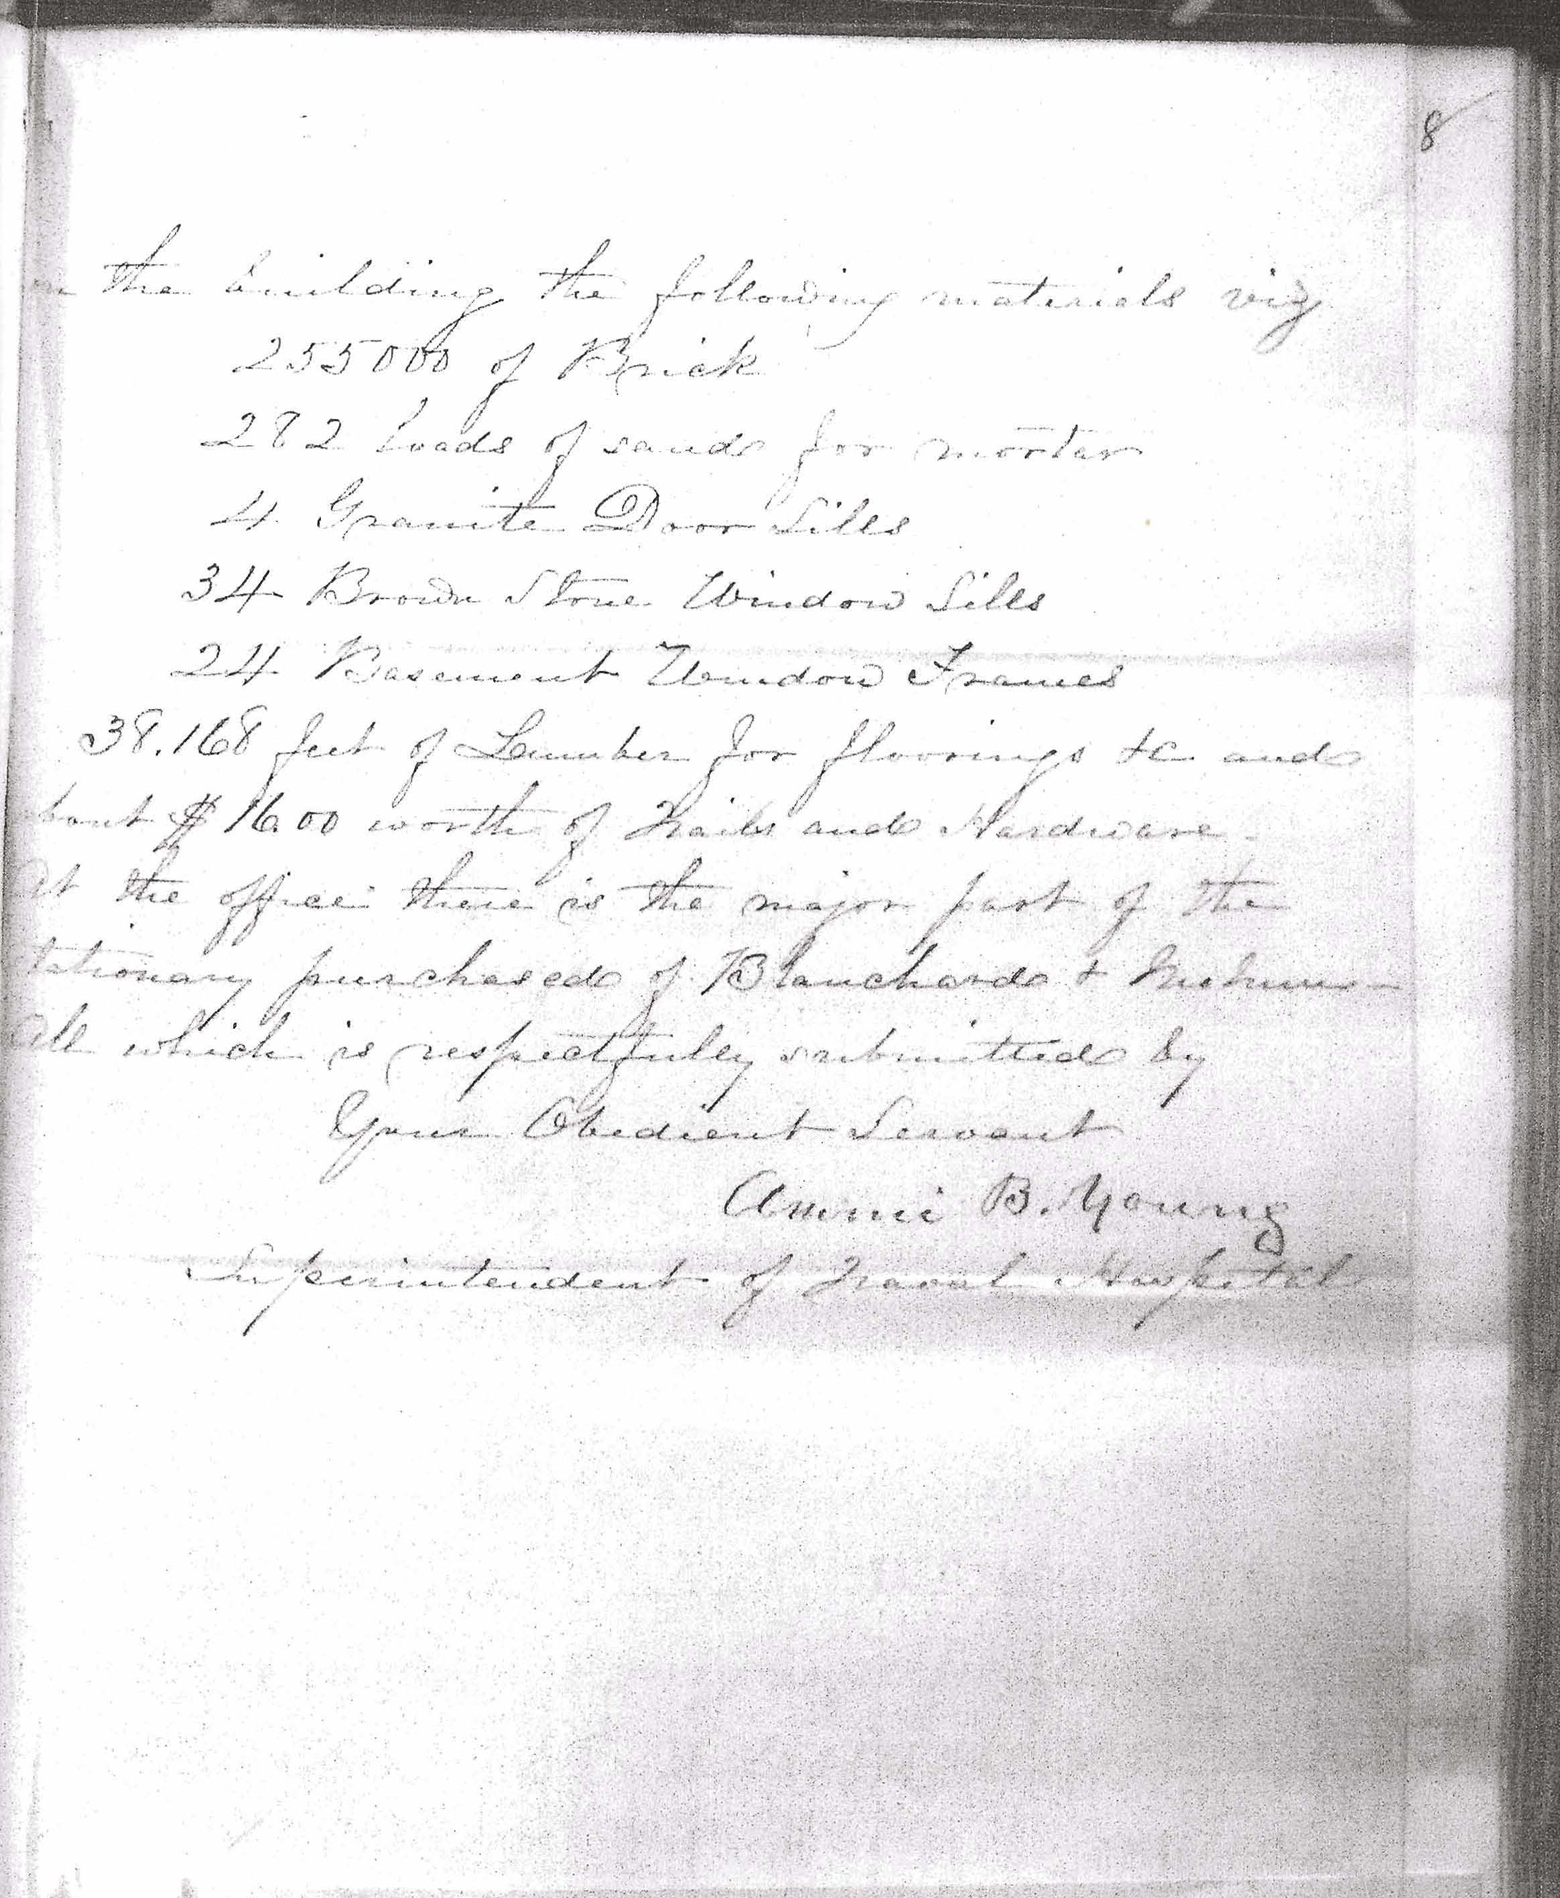 Monthly Report of the Superintendent of Construction, January 2, 1865, Page 4 of 4